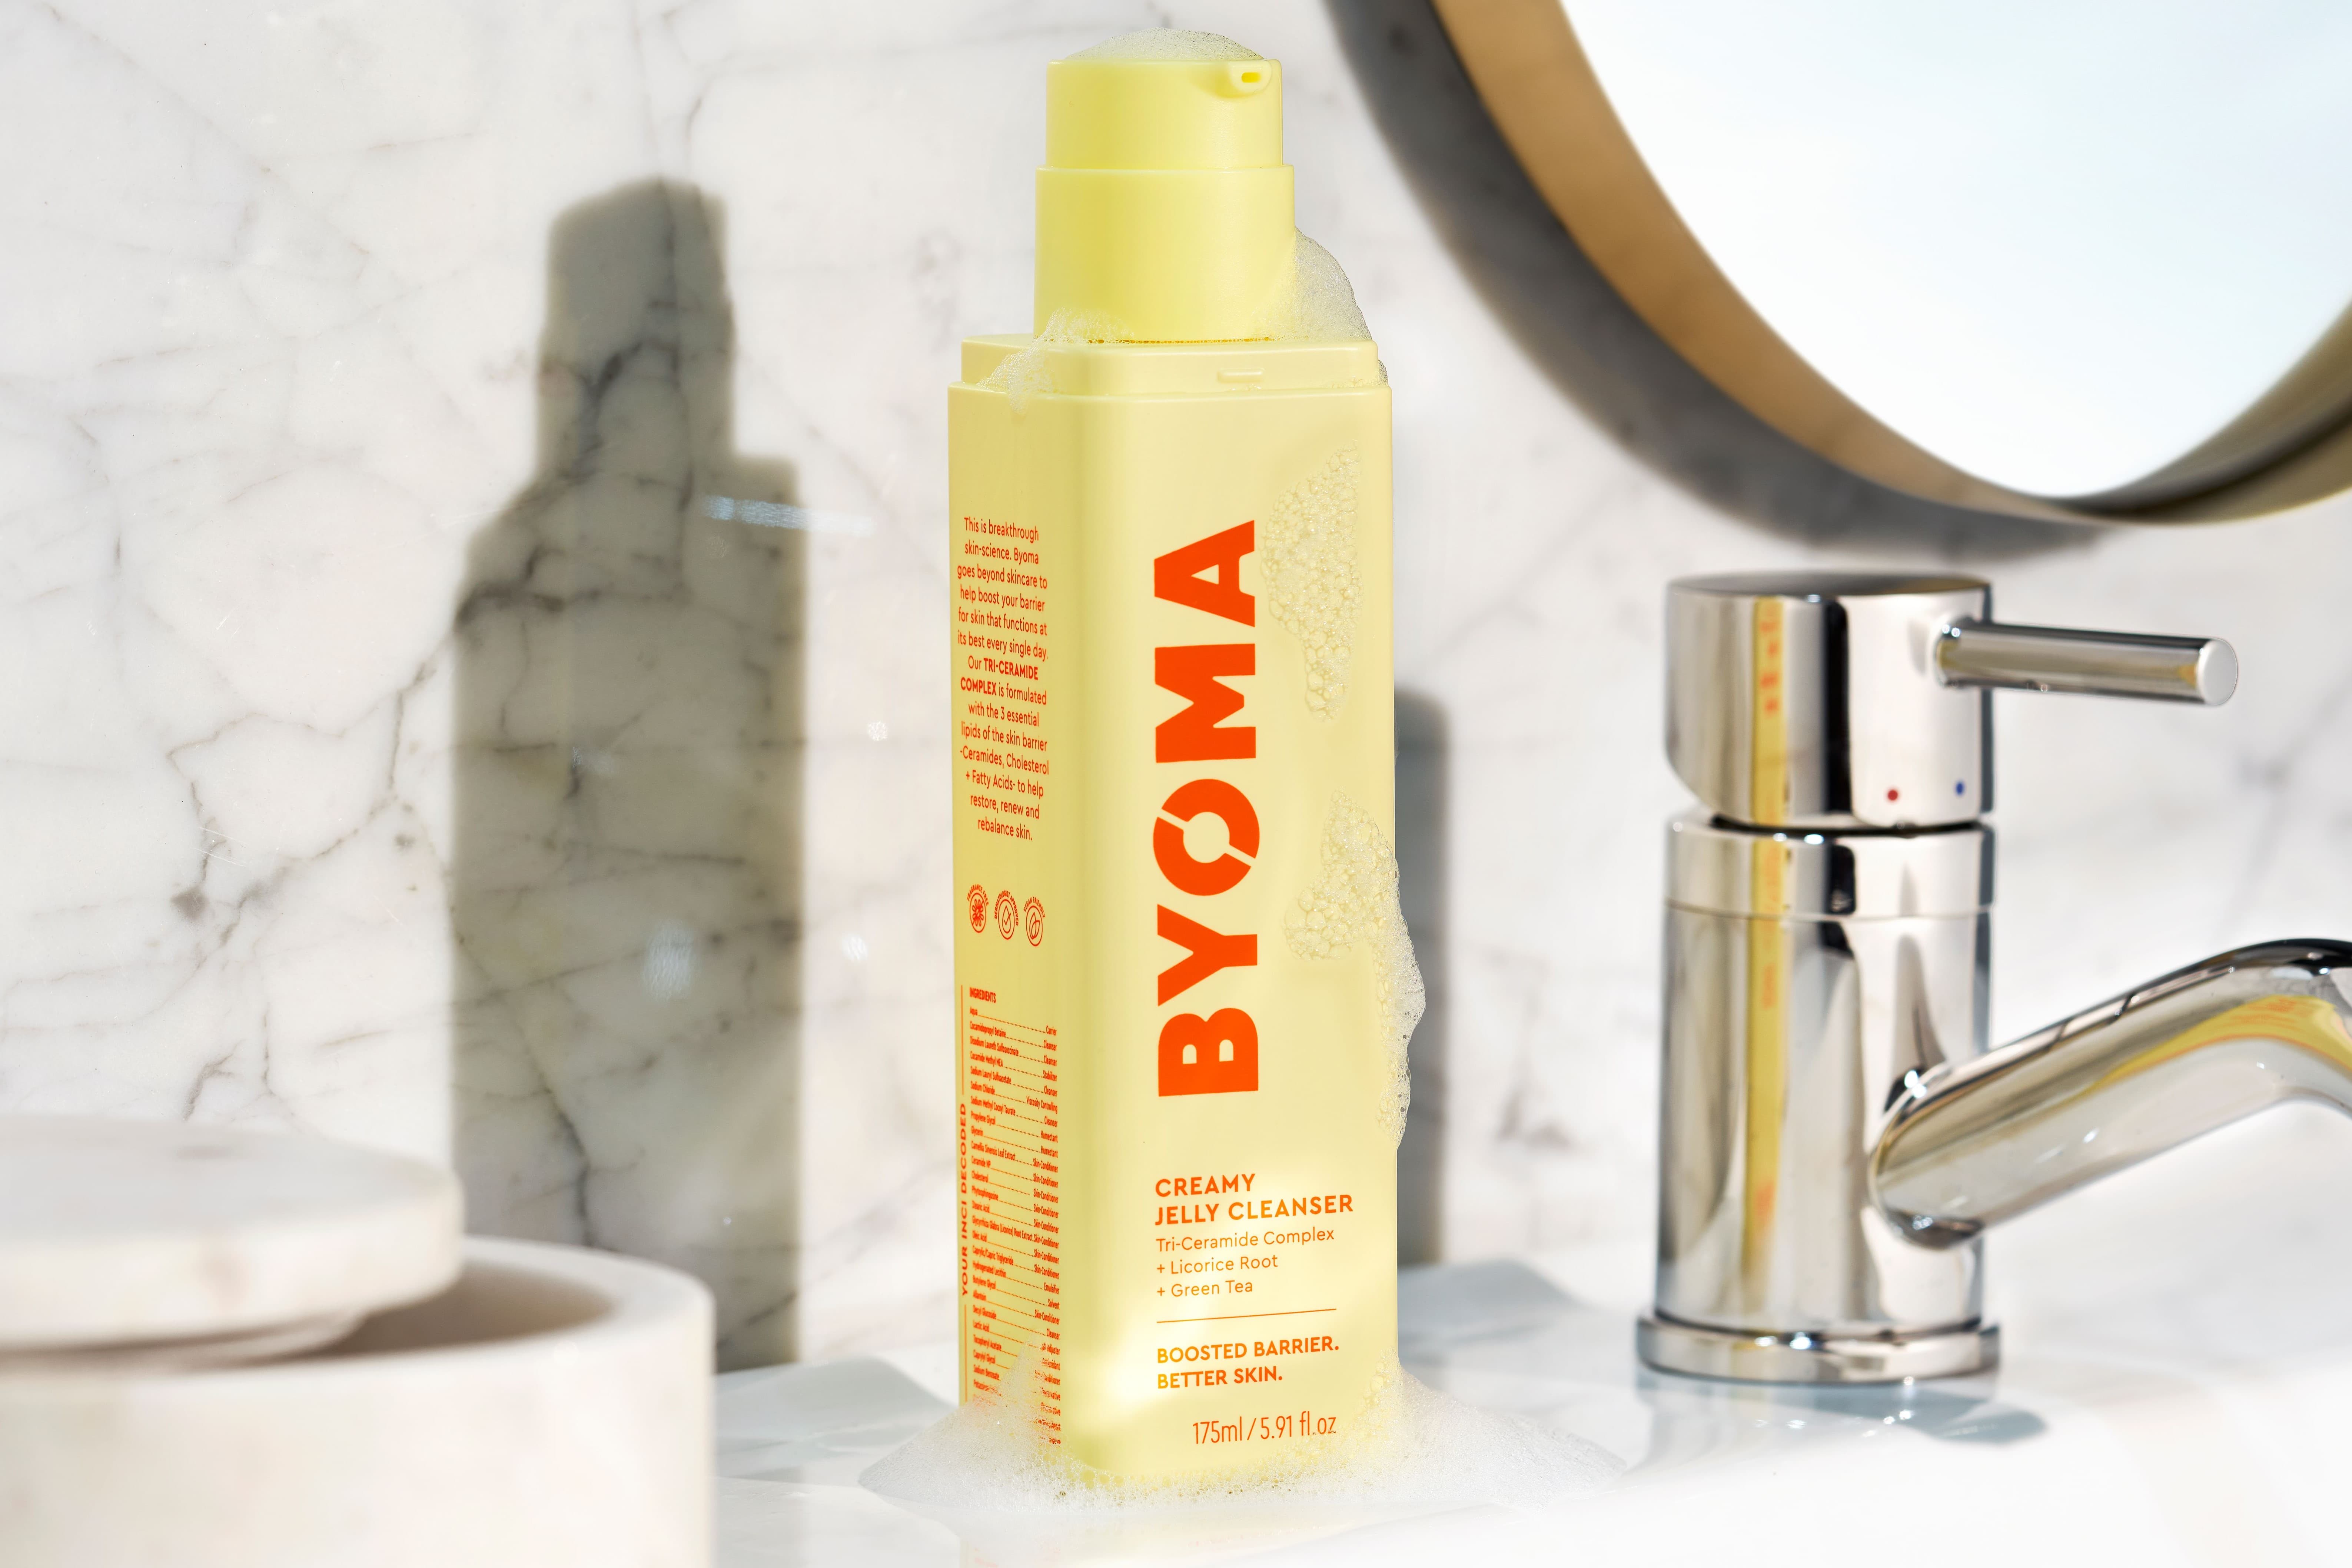 Byoma Creamy Jelly Cleanser Review | Space NK